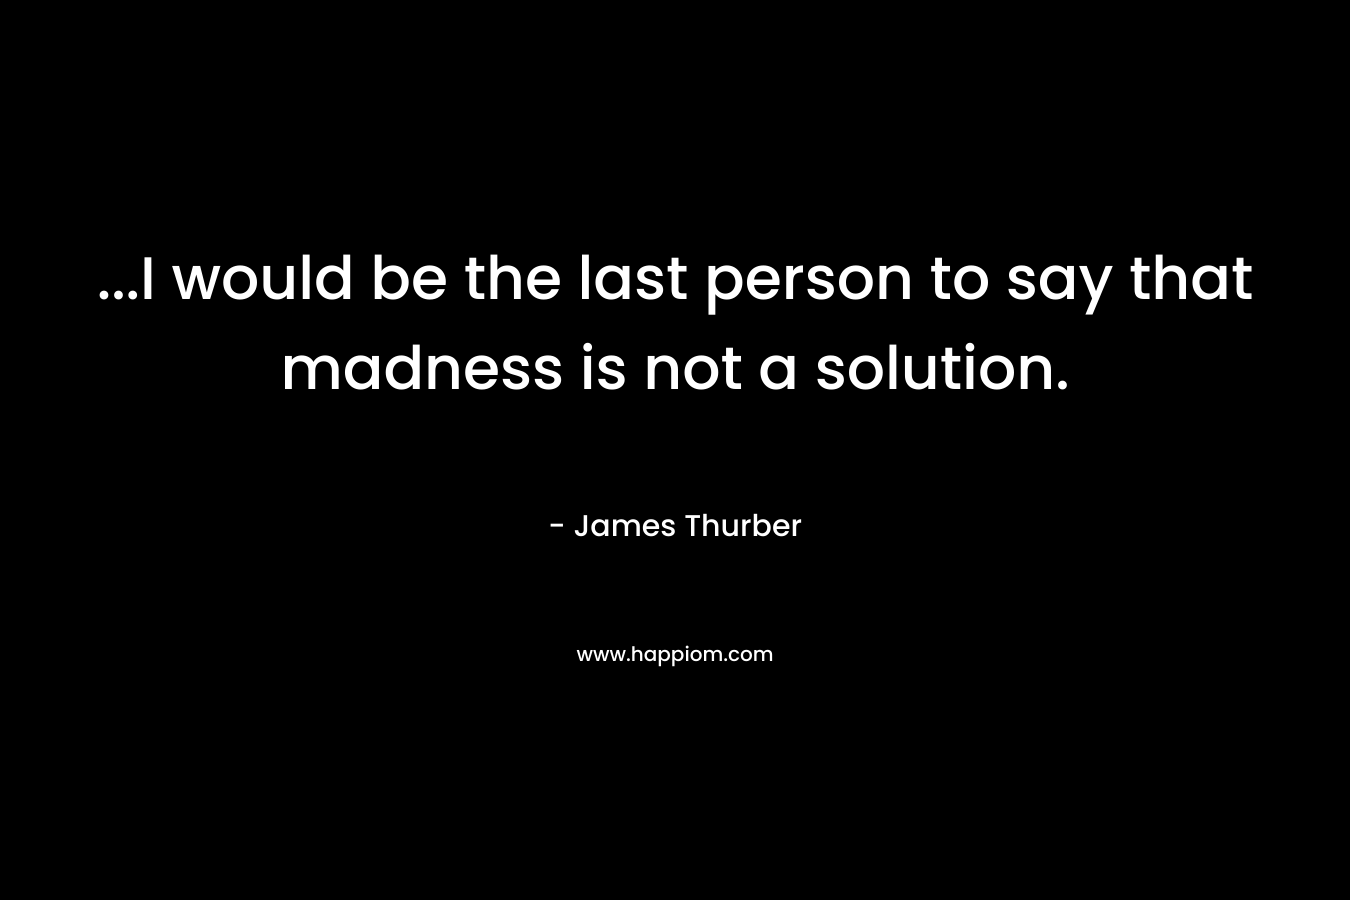 ...I would be the last person to say that madness is not a solution.